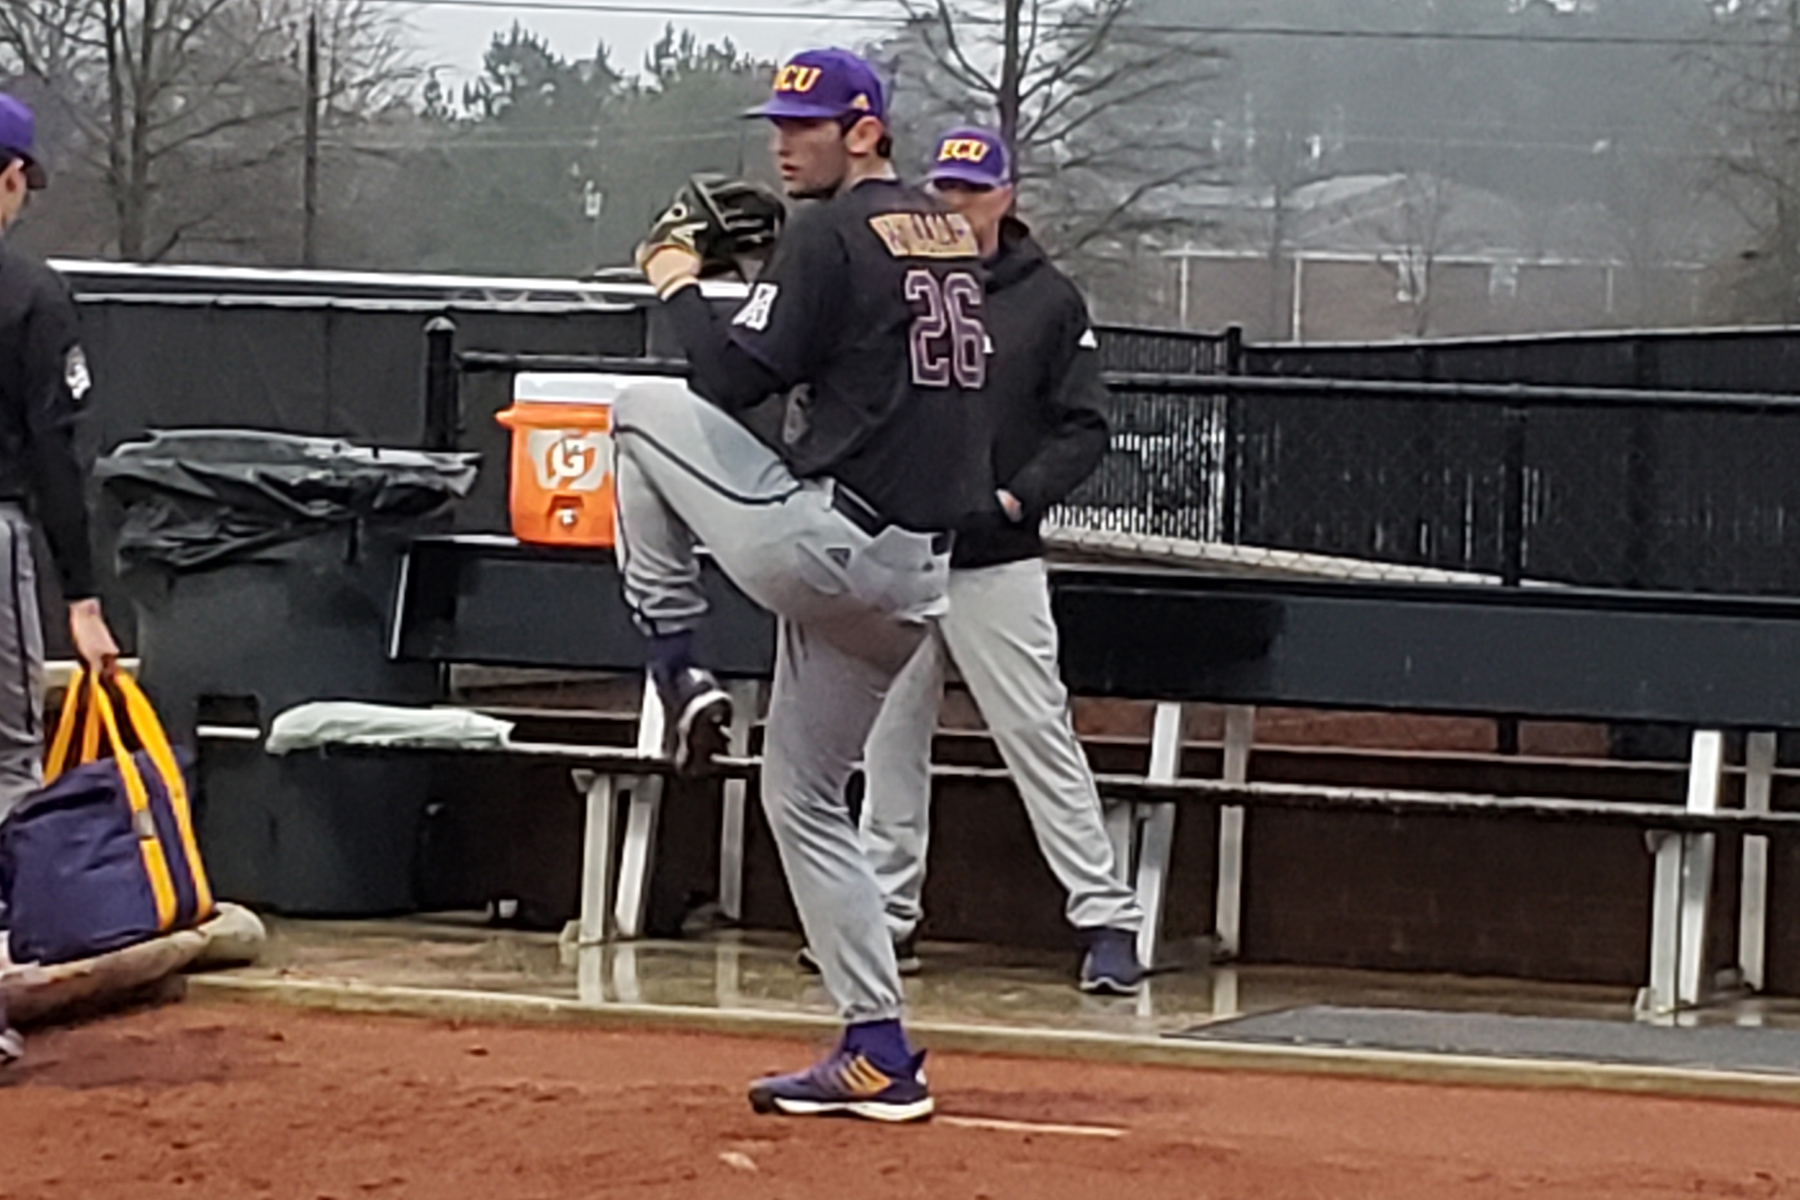 Called Third Strike: Williams pitches at ECU, Jacobs preps for spring training